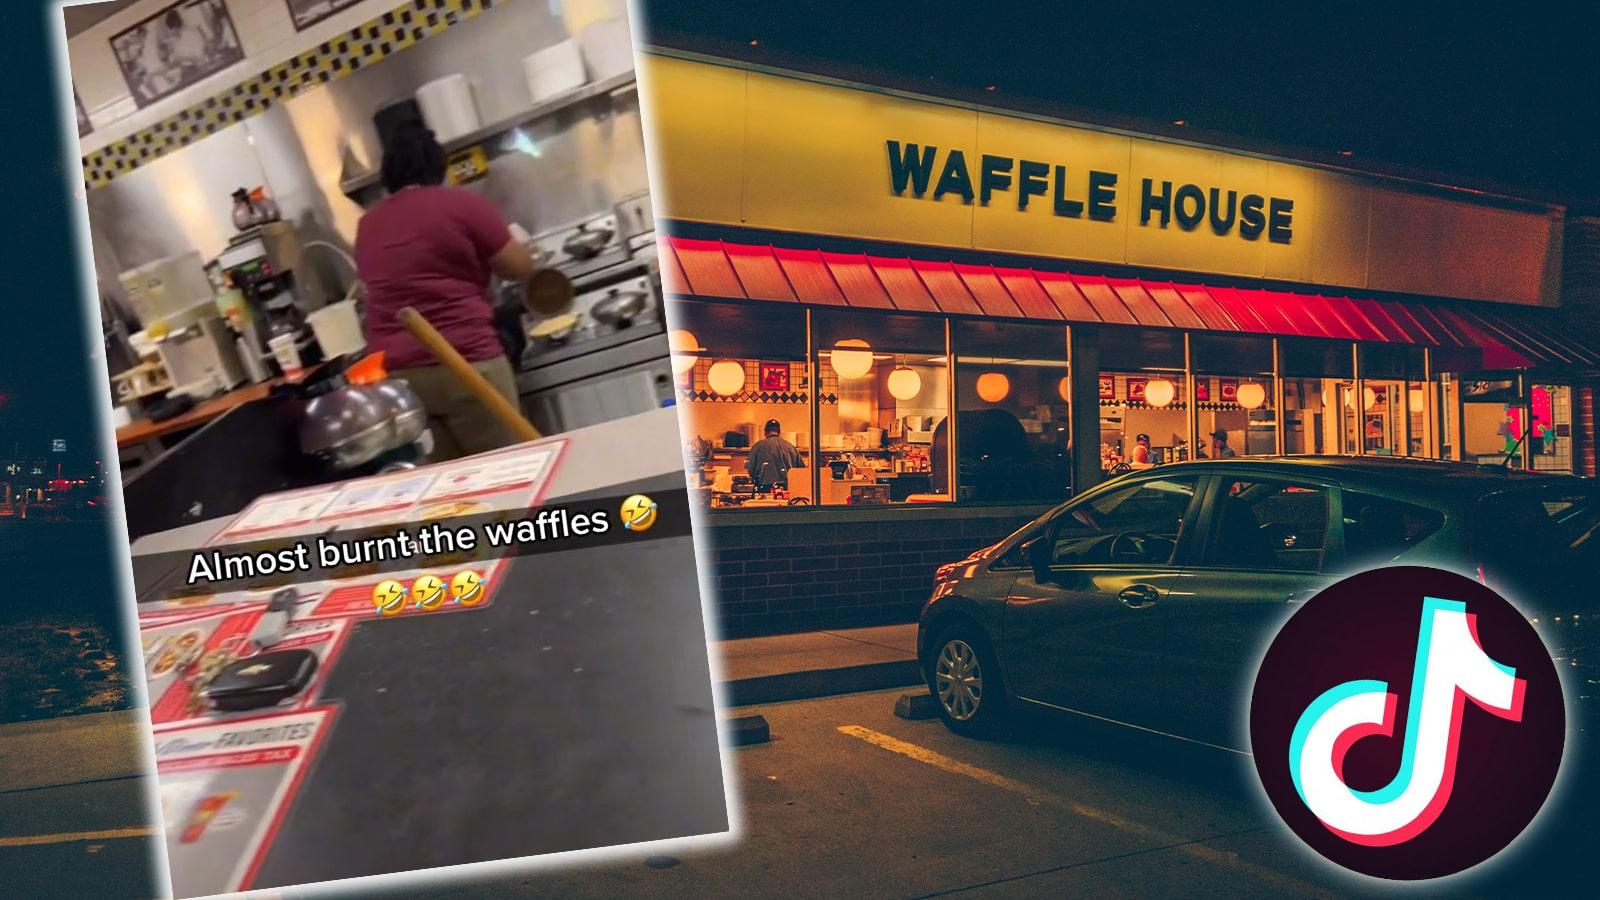 TikToker goes viral for making own food at waffle house